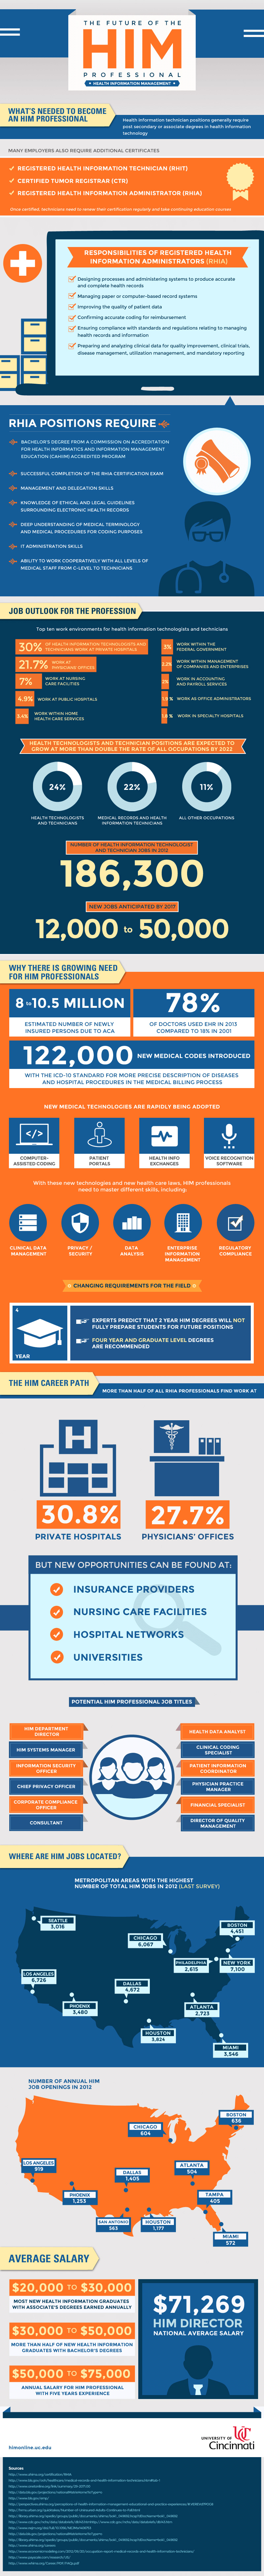 Infographic: Future of the HIM Professional infographic